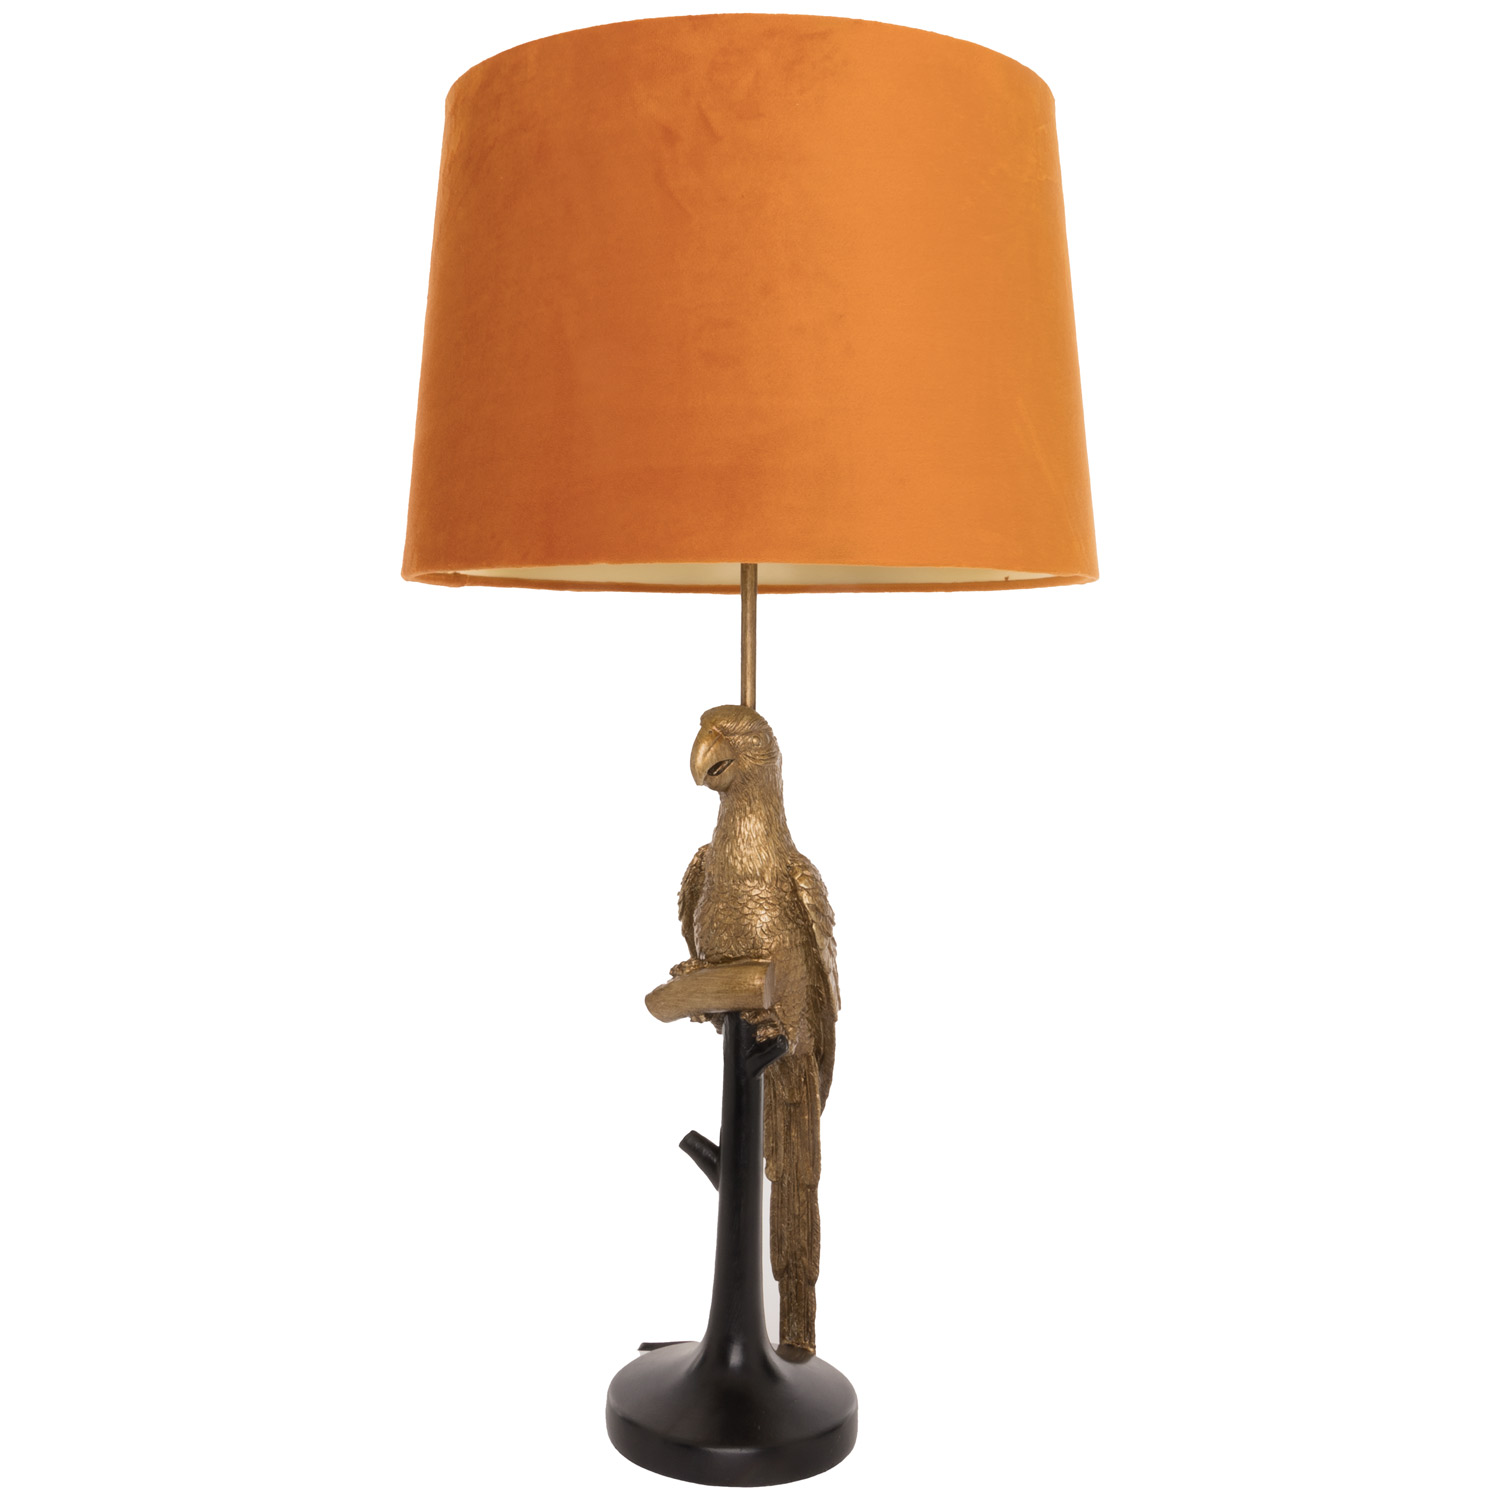 Percy The Parrot Gold And Black Lamp With Burnt Orange Shade - Image 1